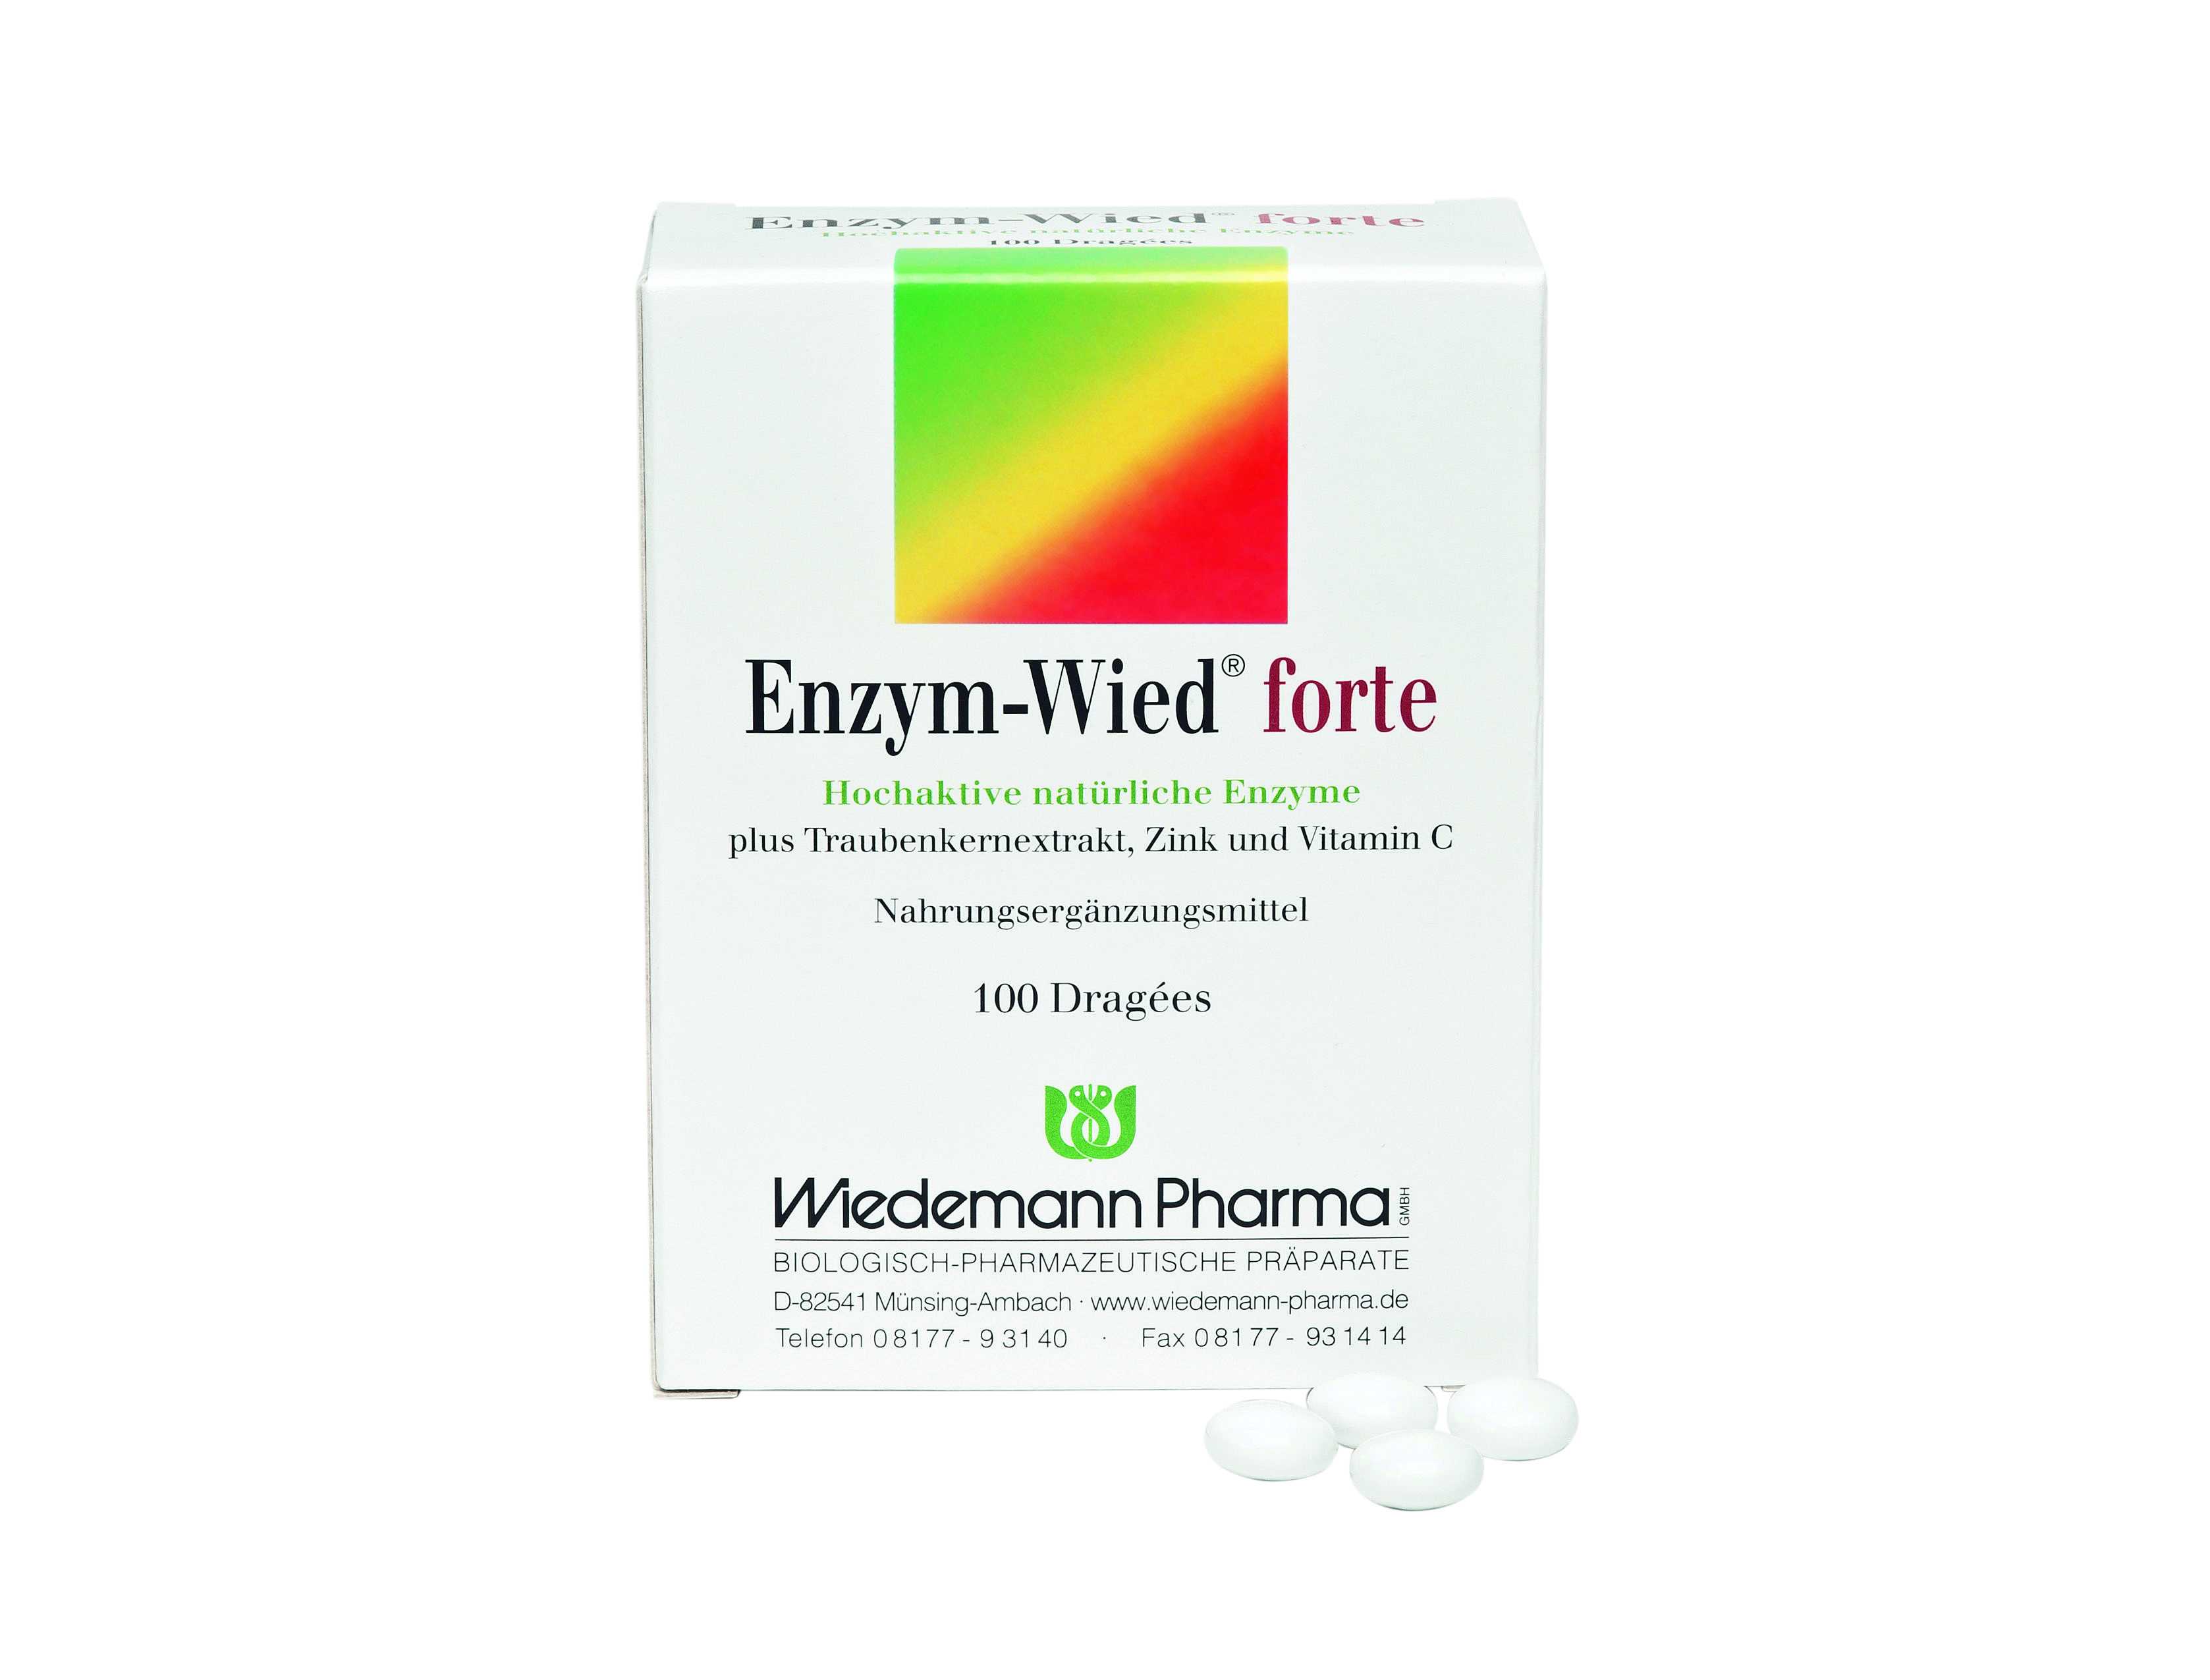 Enzyme-Wied forte